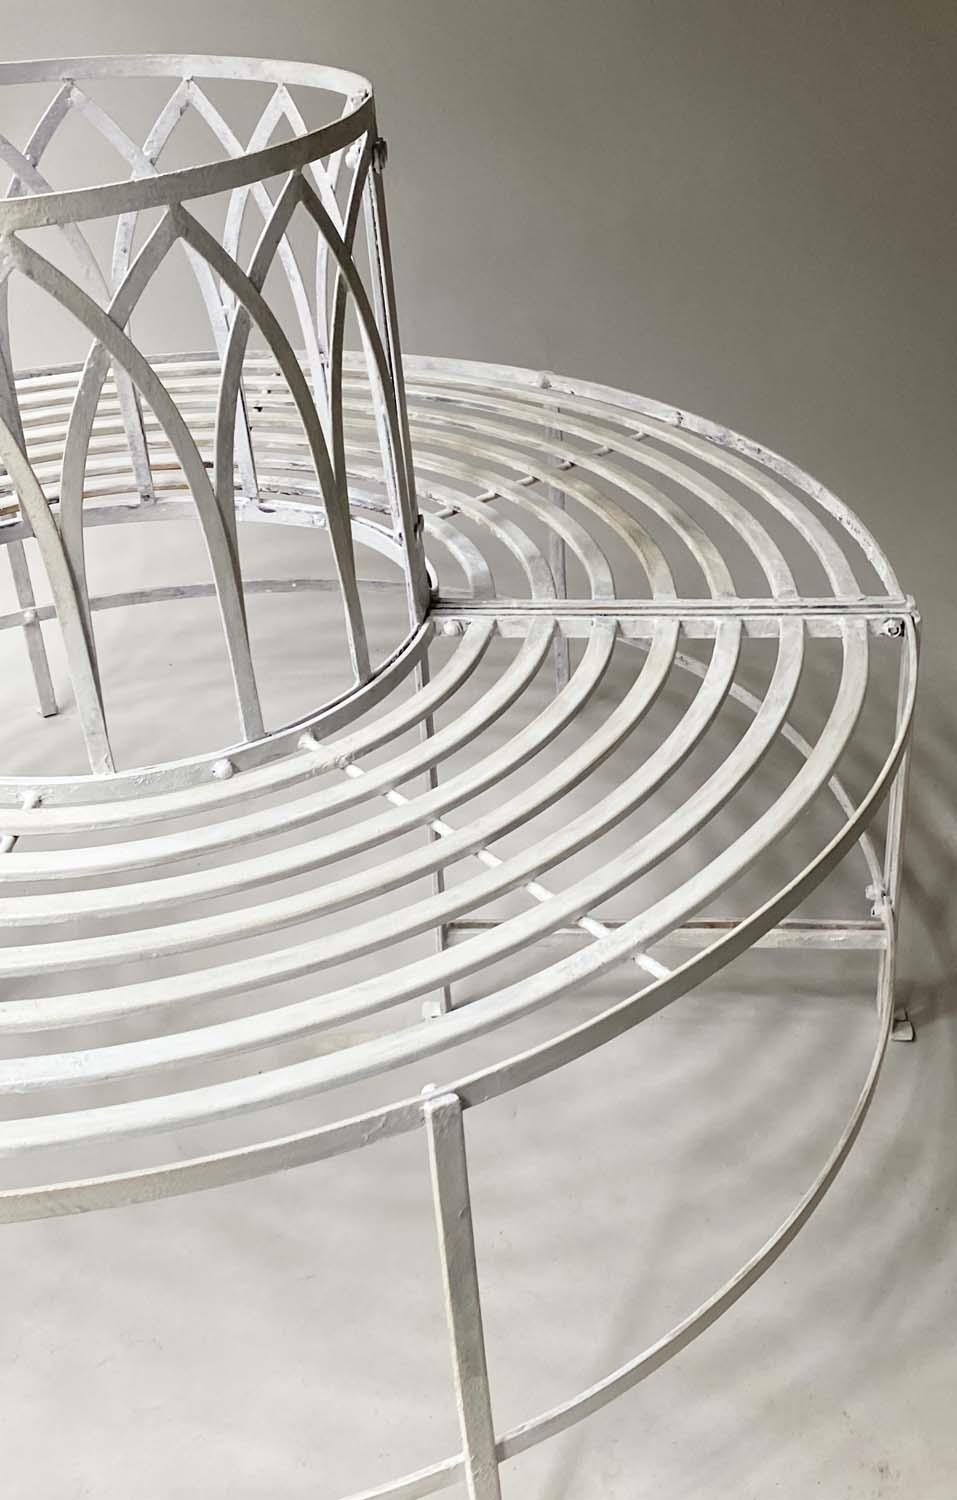 GARDEN TREE BENCH, white painted metal slatted full circle with Gothic arched upstand, 132cm W, - Image 3 of 6